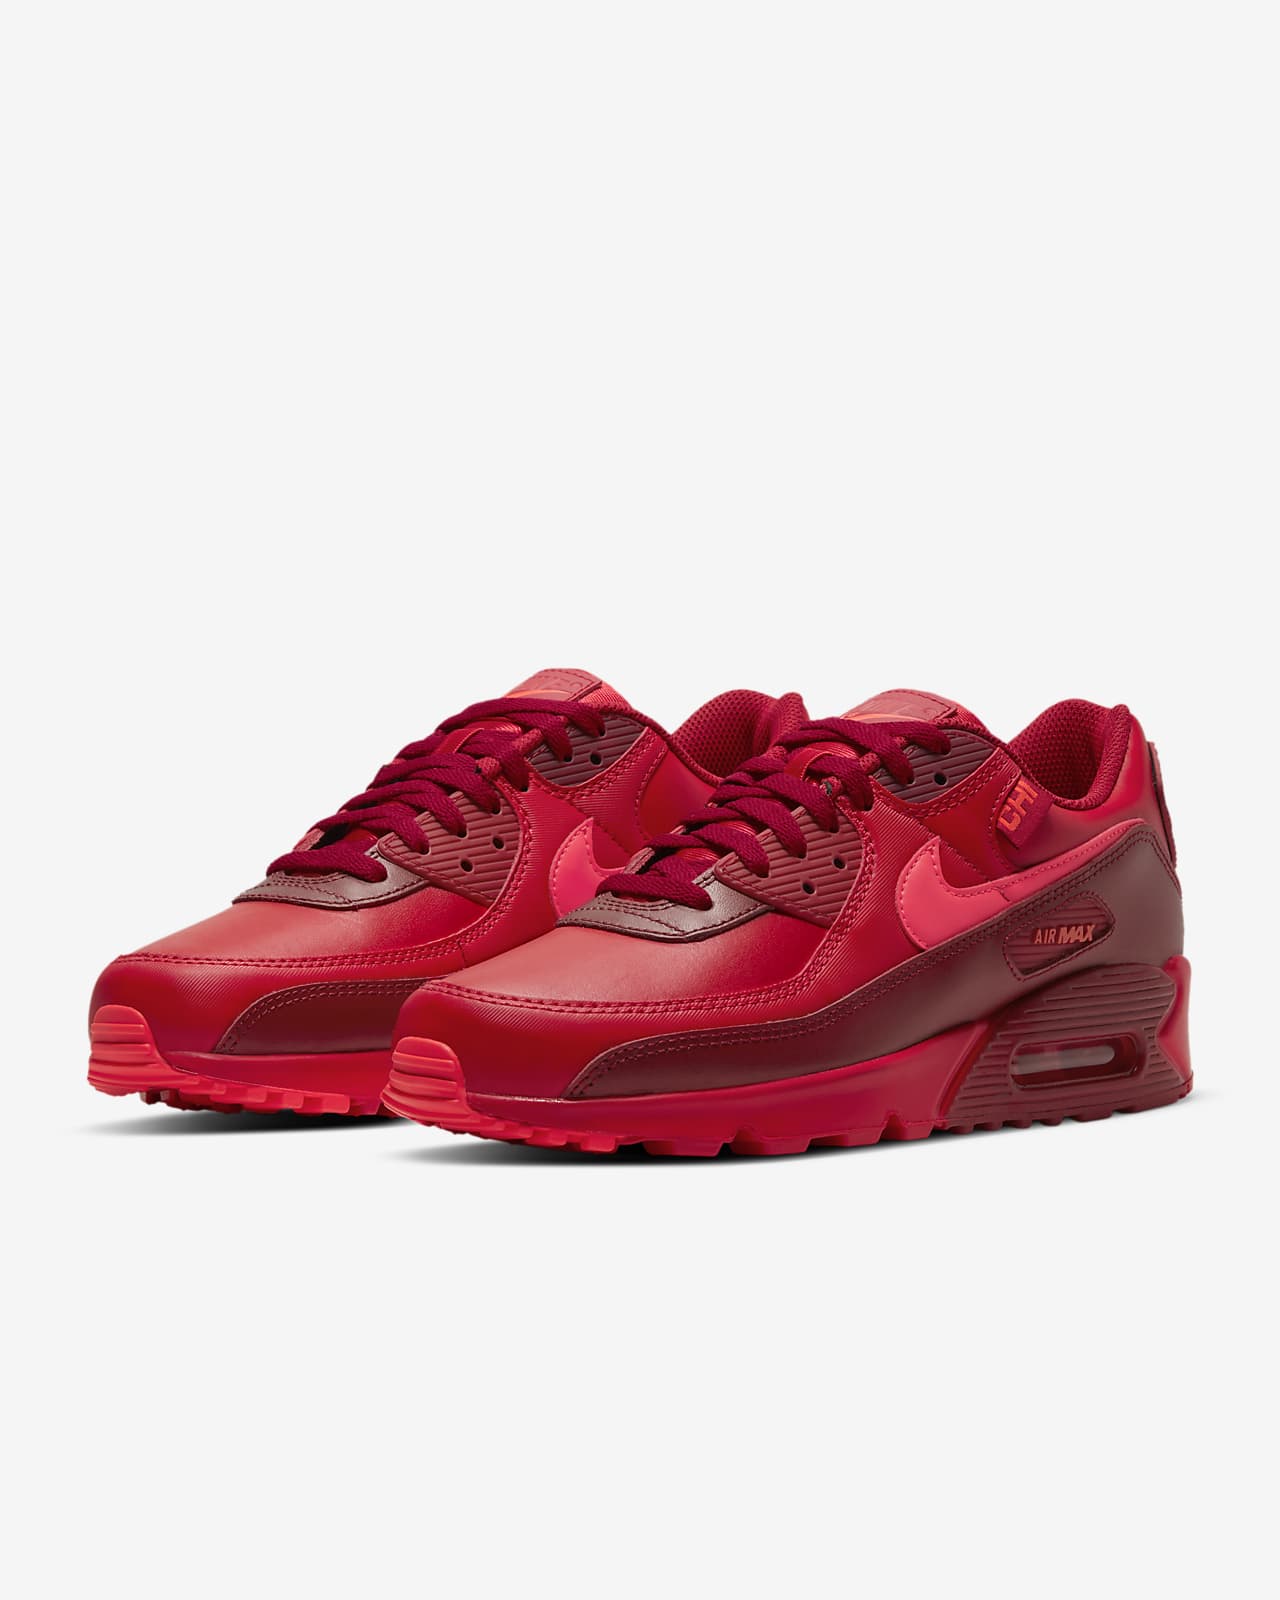 nike air max red shoes